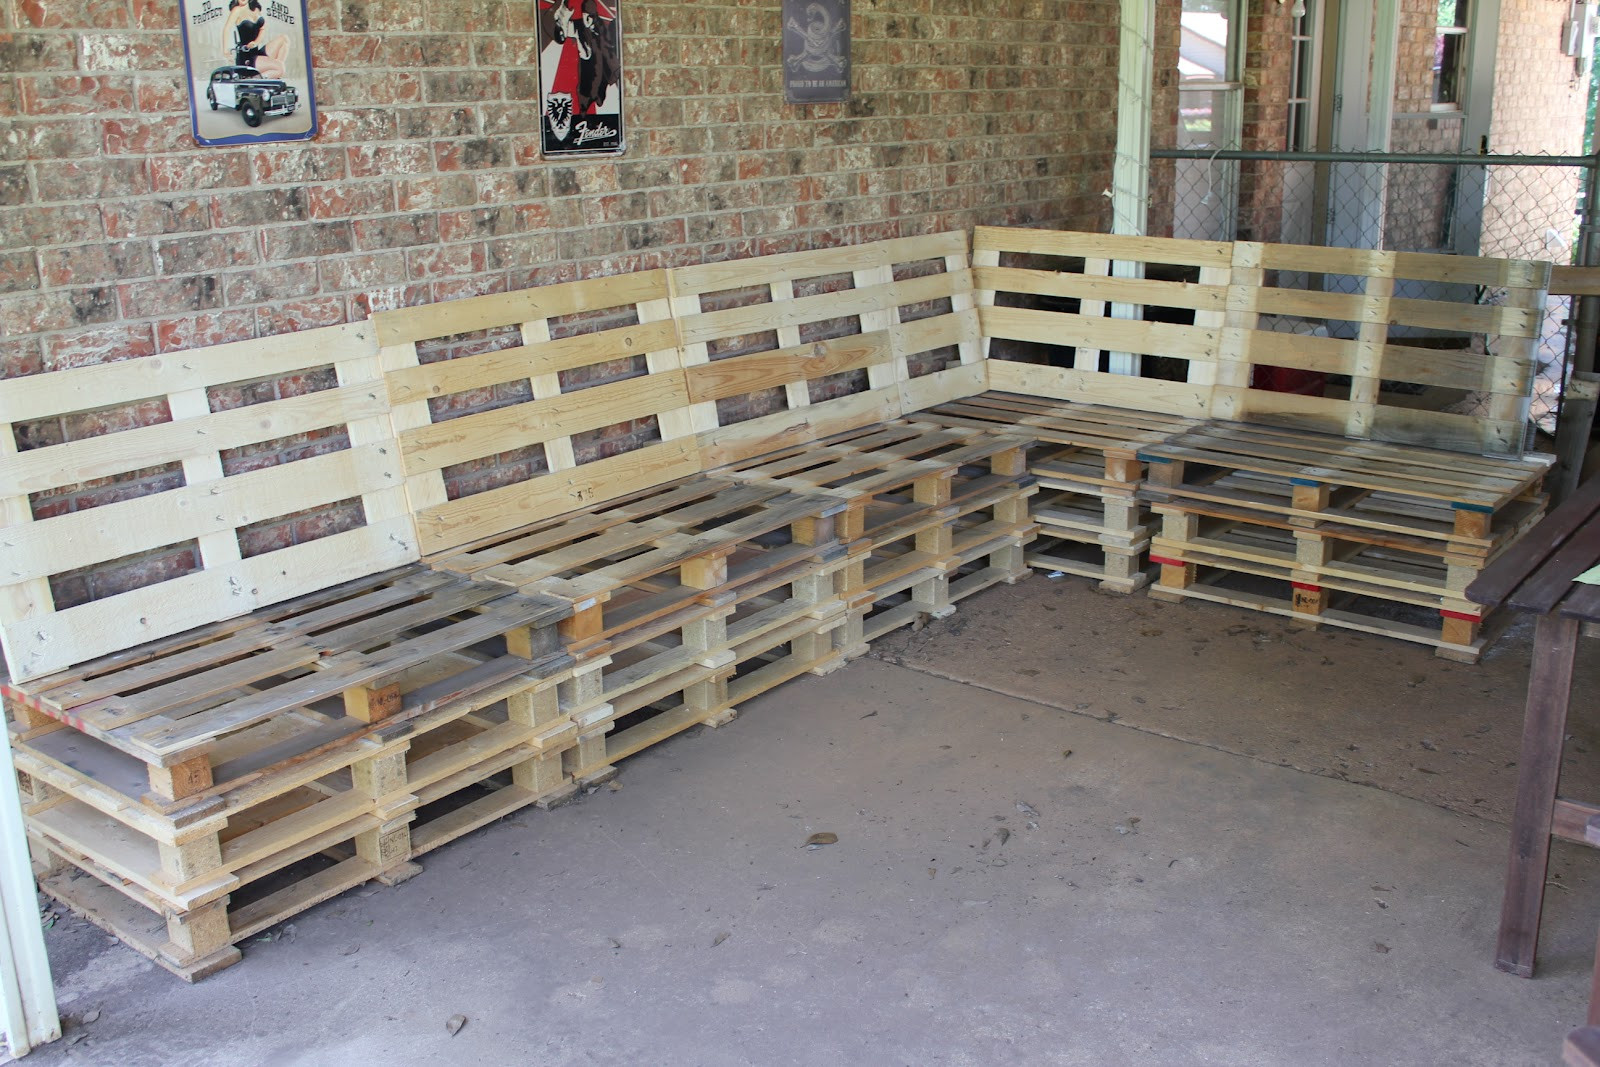 Pallet Backyard Furniture
 DIY Outdoor Patio Furniture from Pallets